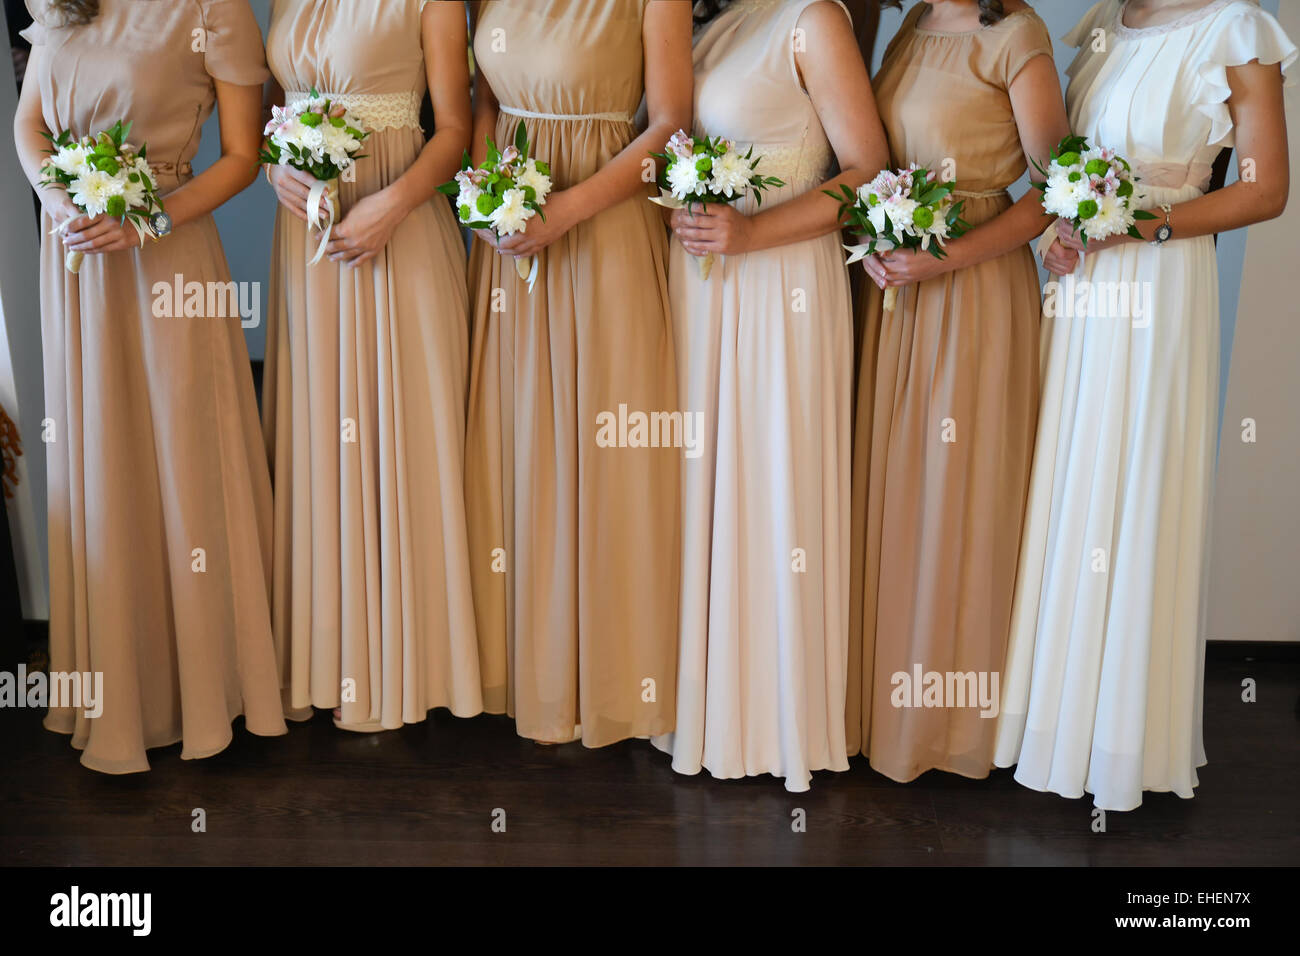 Bridesmaid holding in her hands a bouquet of flowers Stock Photo